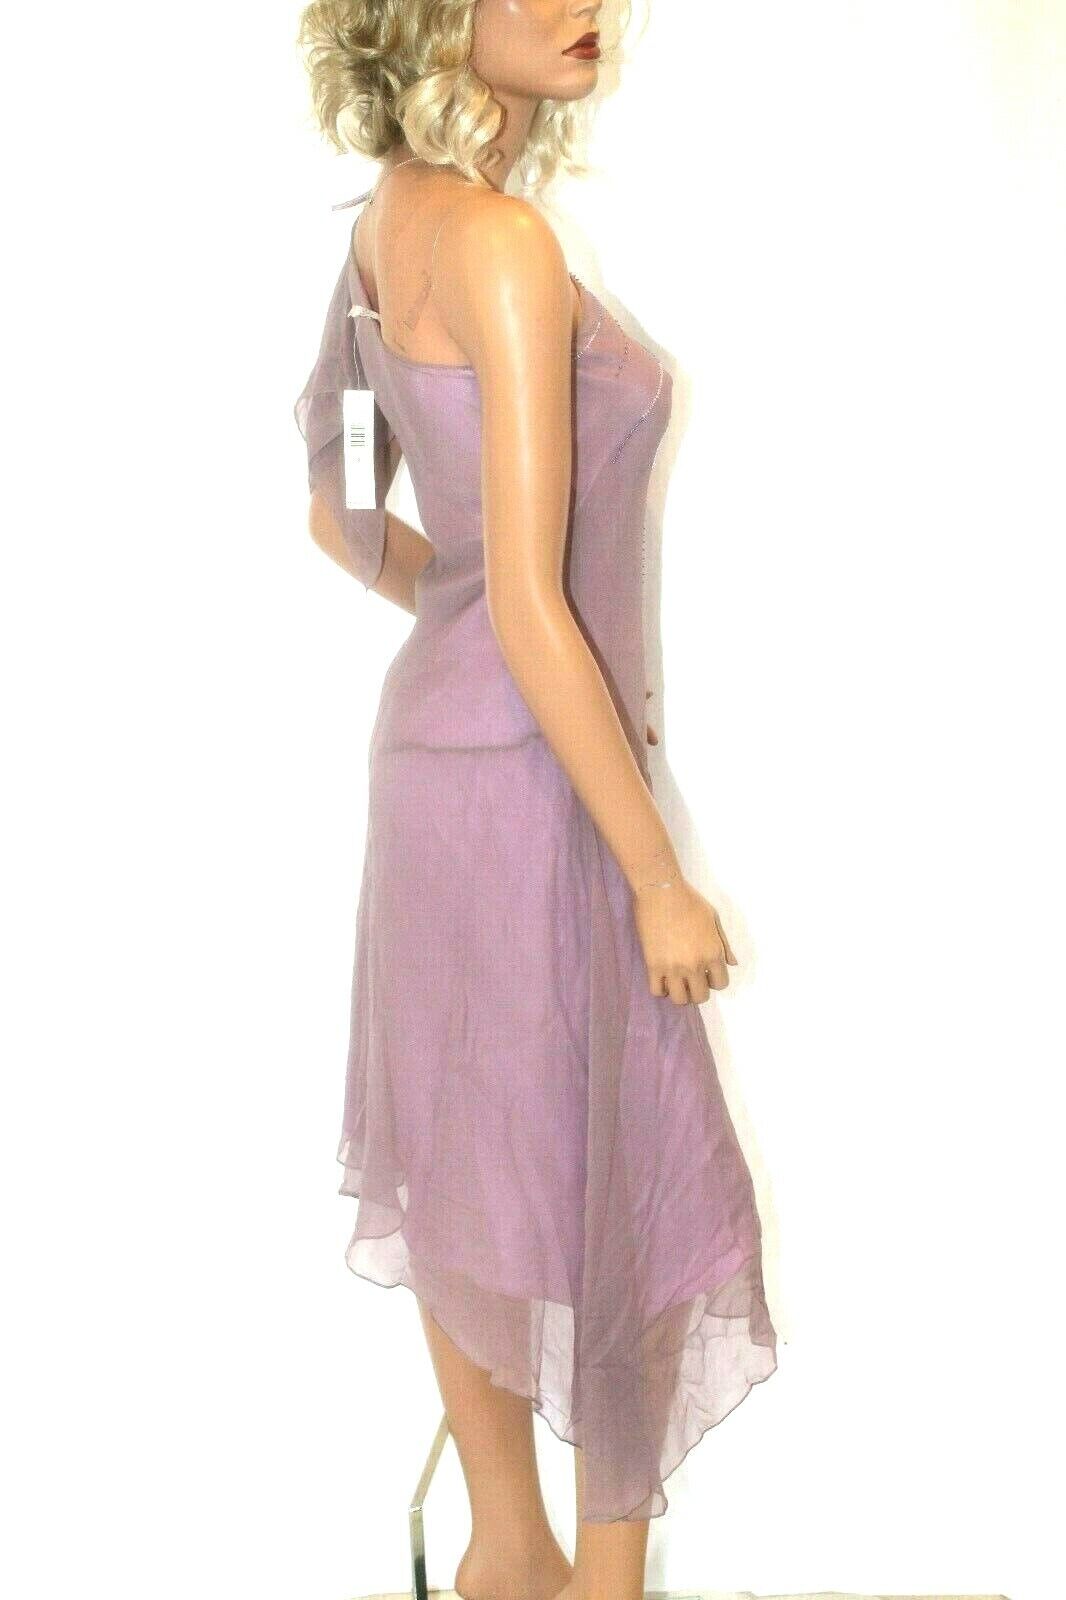 *NWT* $200. Laundry by Shelli Segal 100% Silk With Beaded Front Purple Gown Sz 2